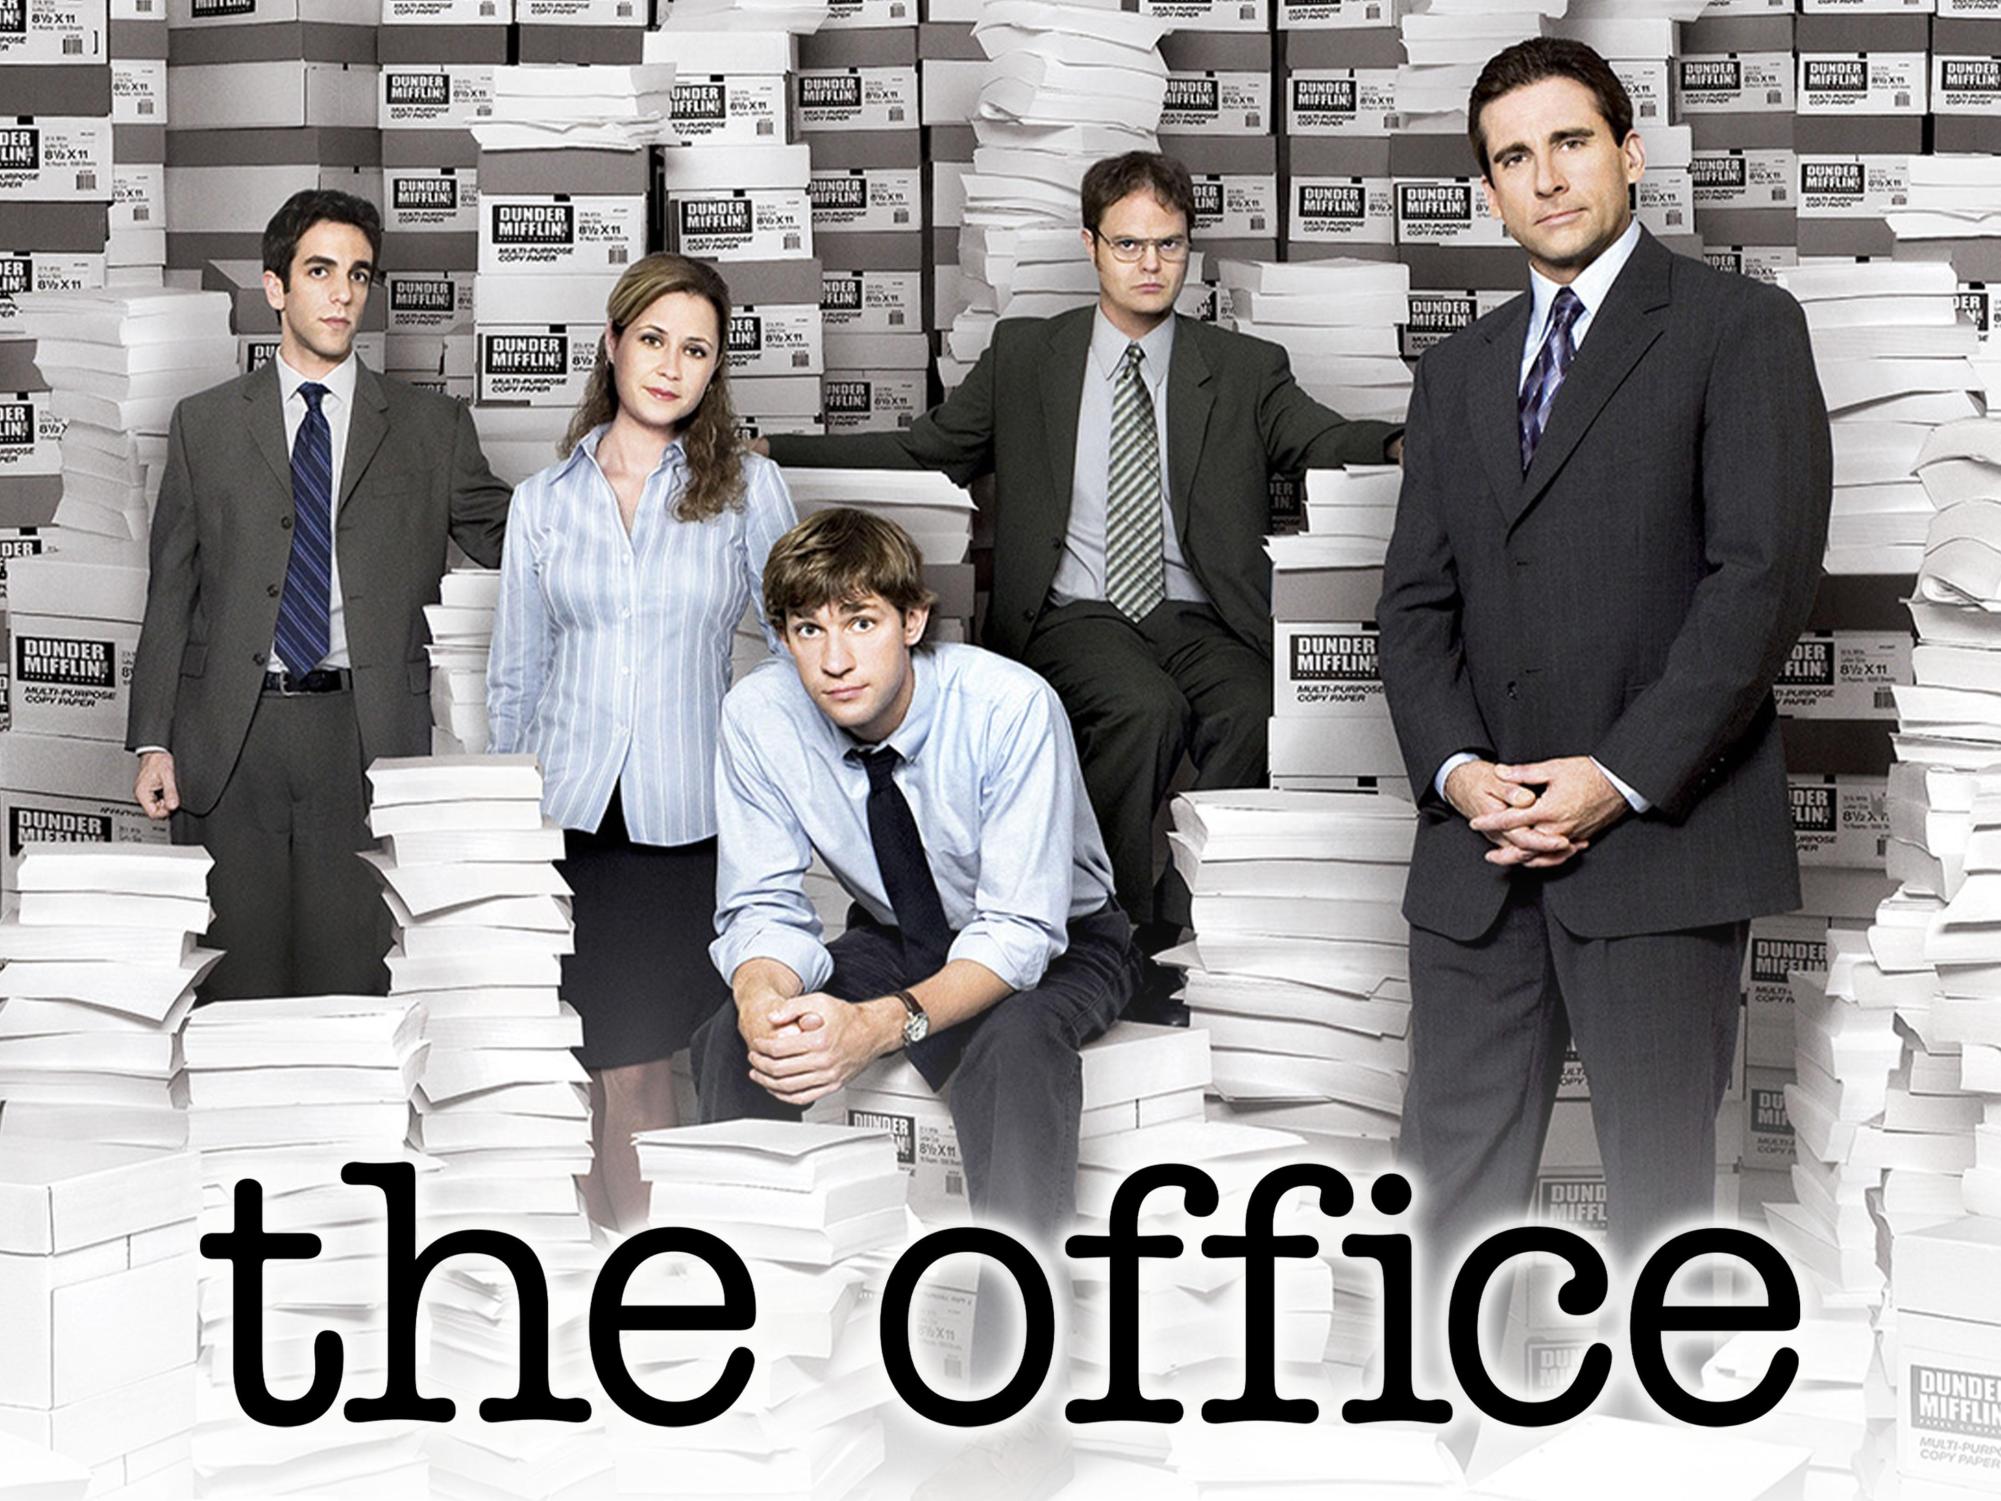 Is “The Office” overrated?